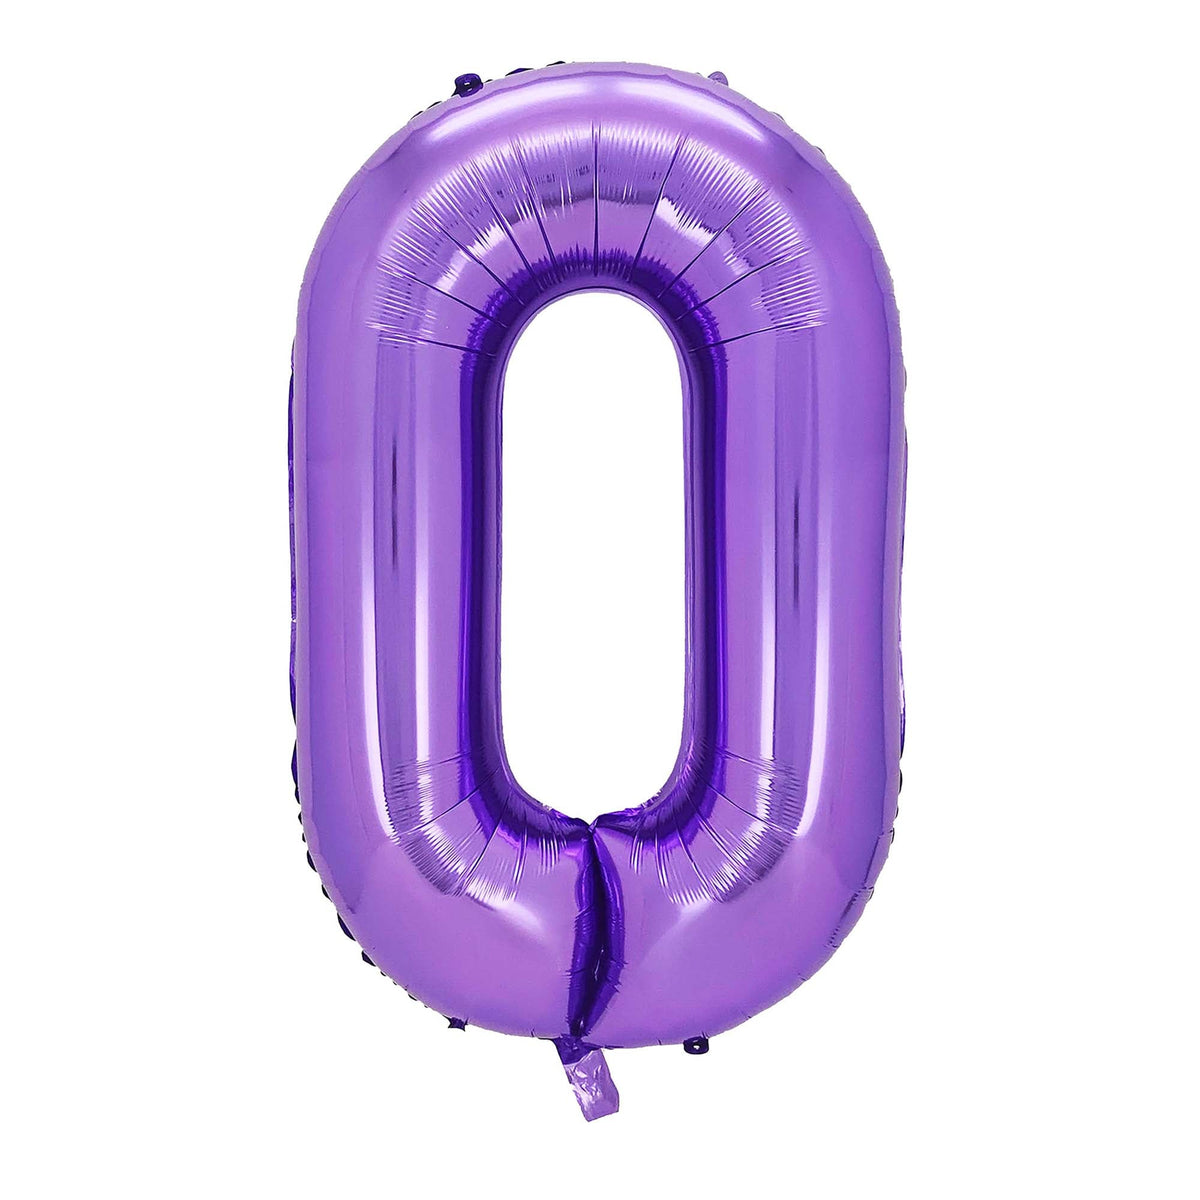 BOOMBA INTERNATIONAL TRADING CO,. LTD Balloons Purple Number 0 Supershape Foil Balloon, 40 Inches, 1 Count 810077659755